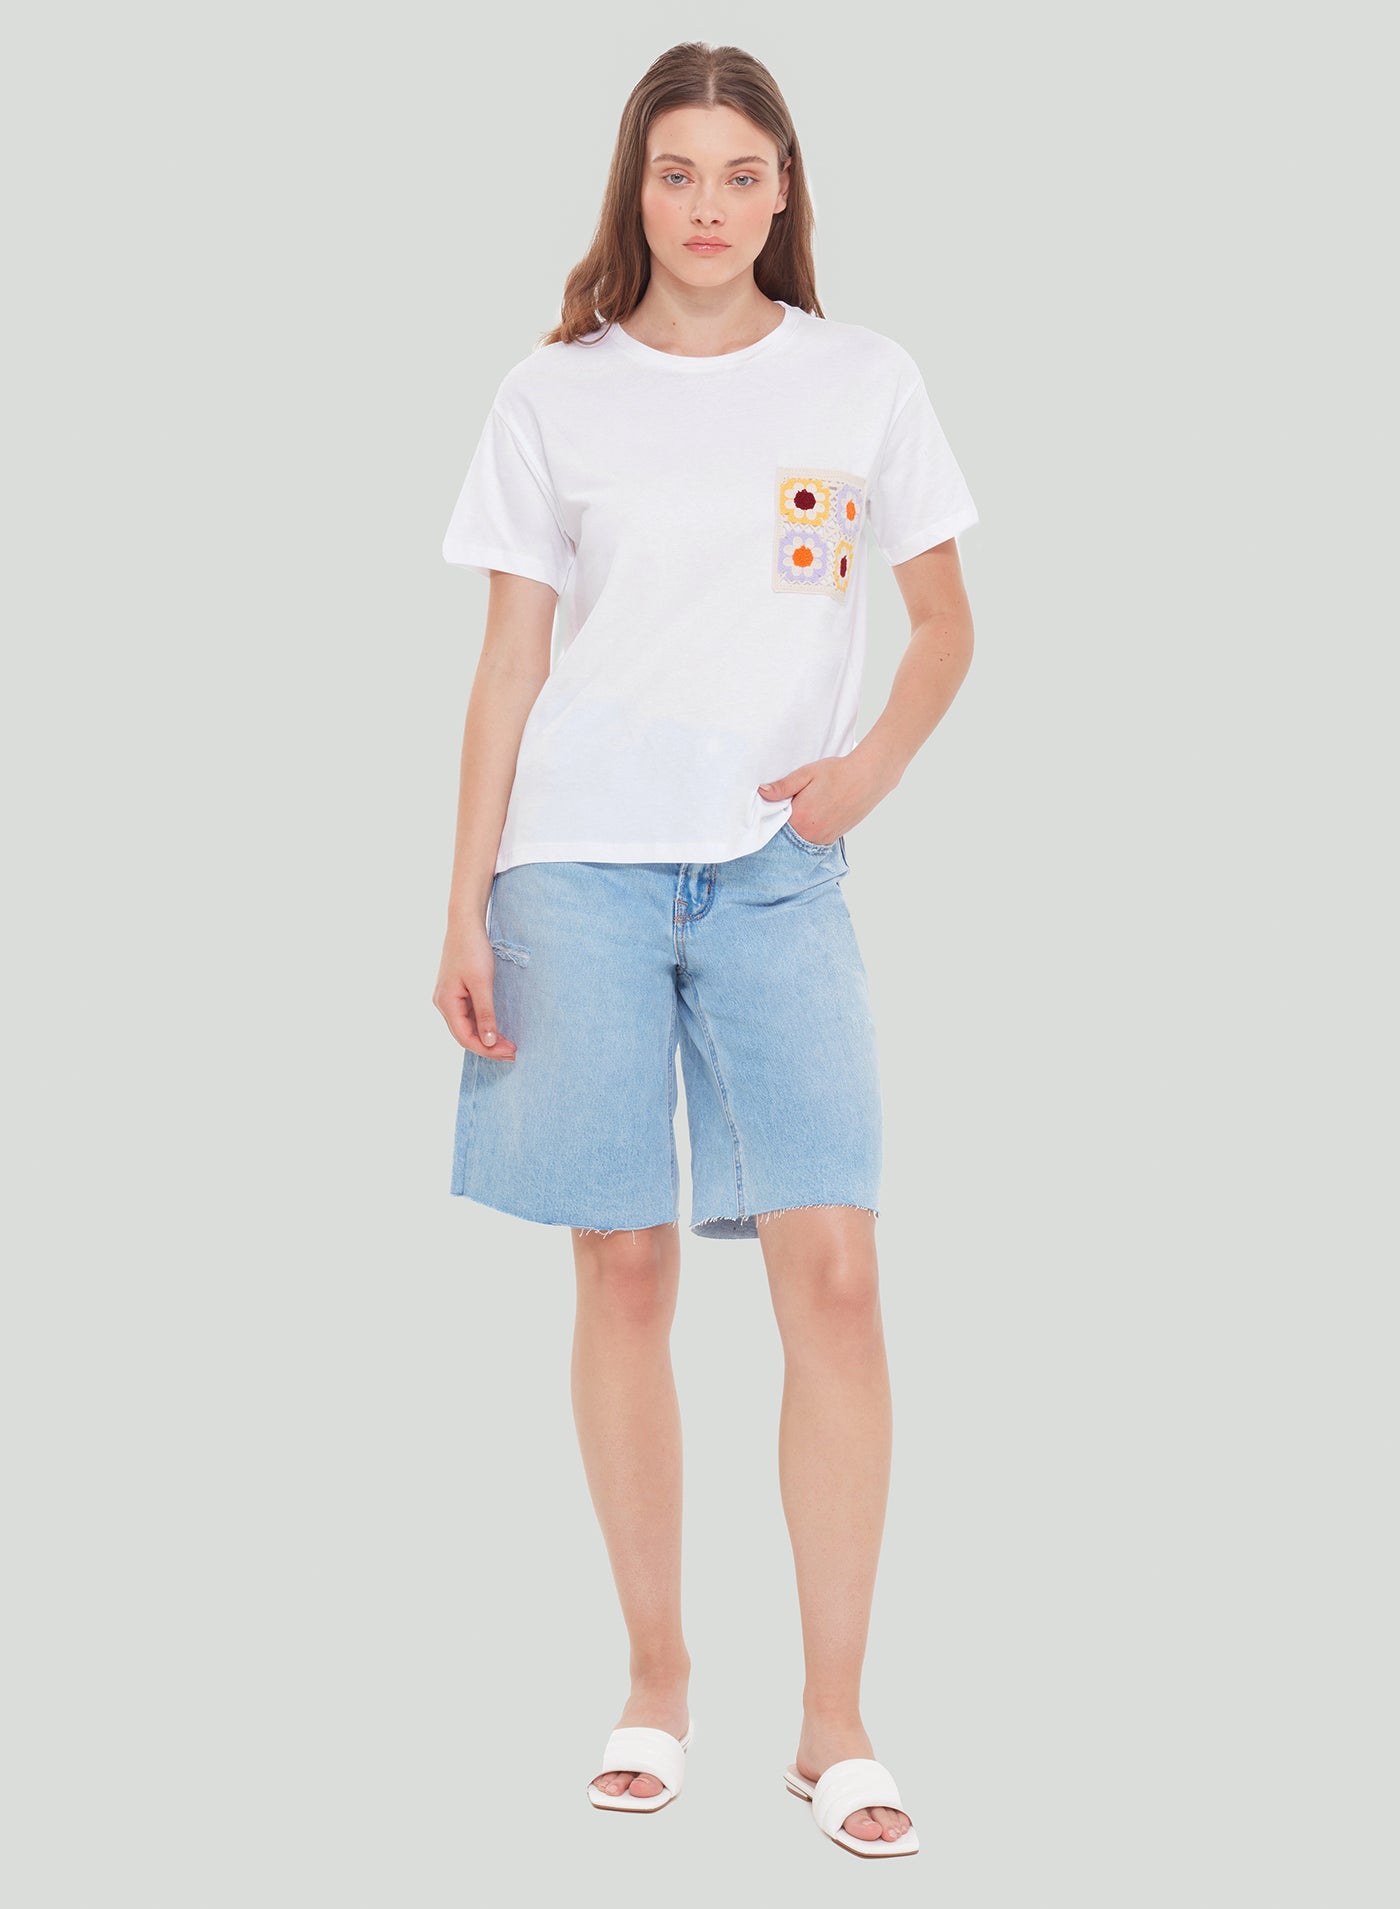 Embroidered Pocket Tee (XS-XL)